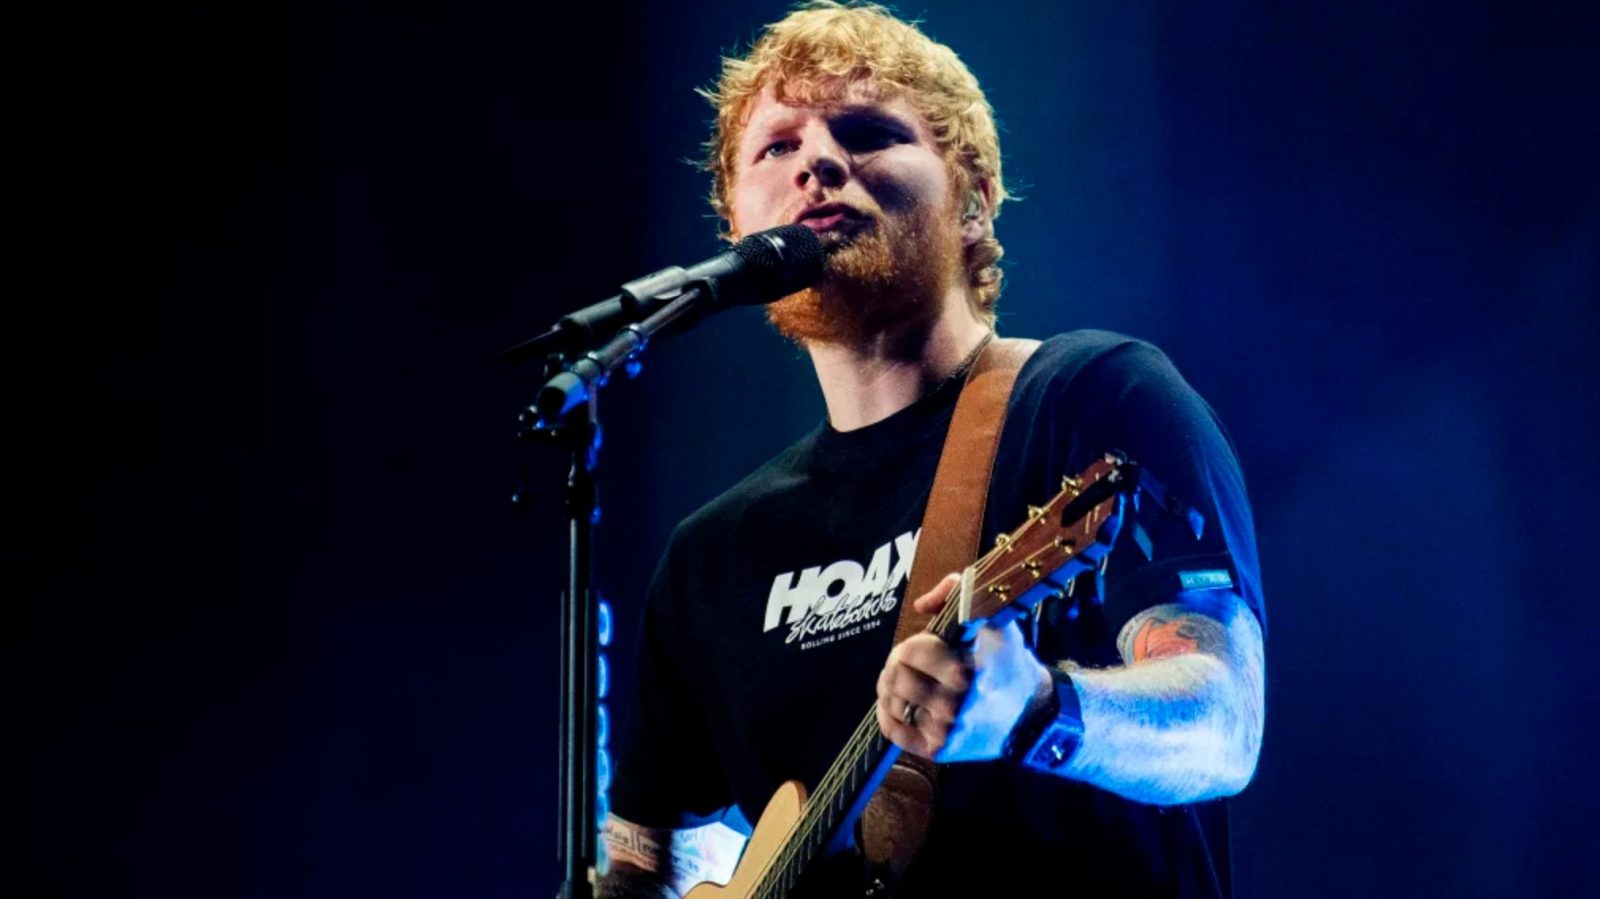 Flying a drone over Ed Sheeran concert results in pilot receiving a $1,050 ticket